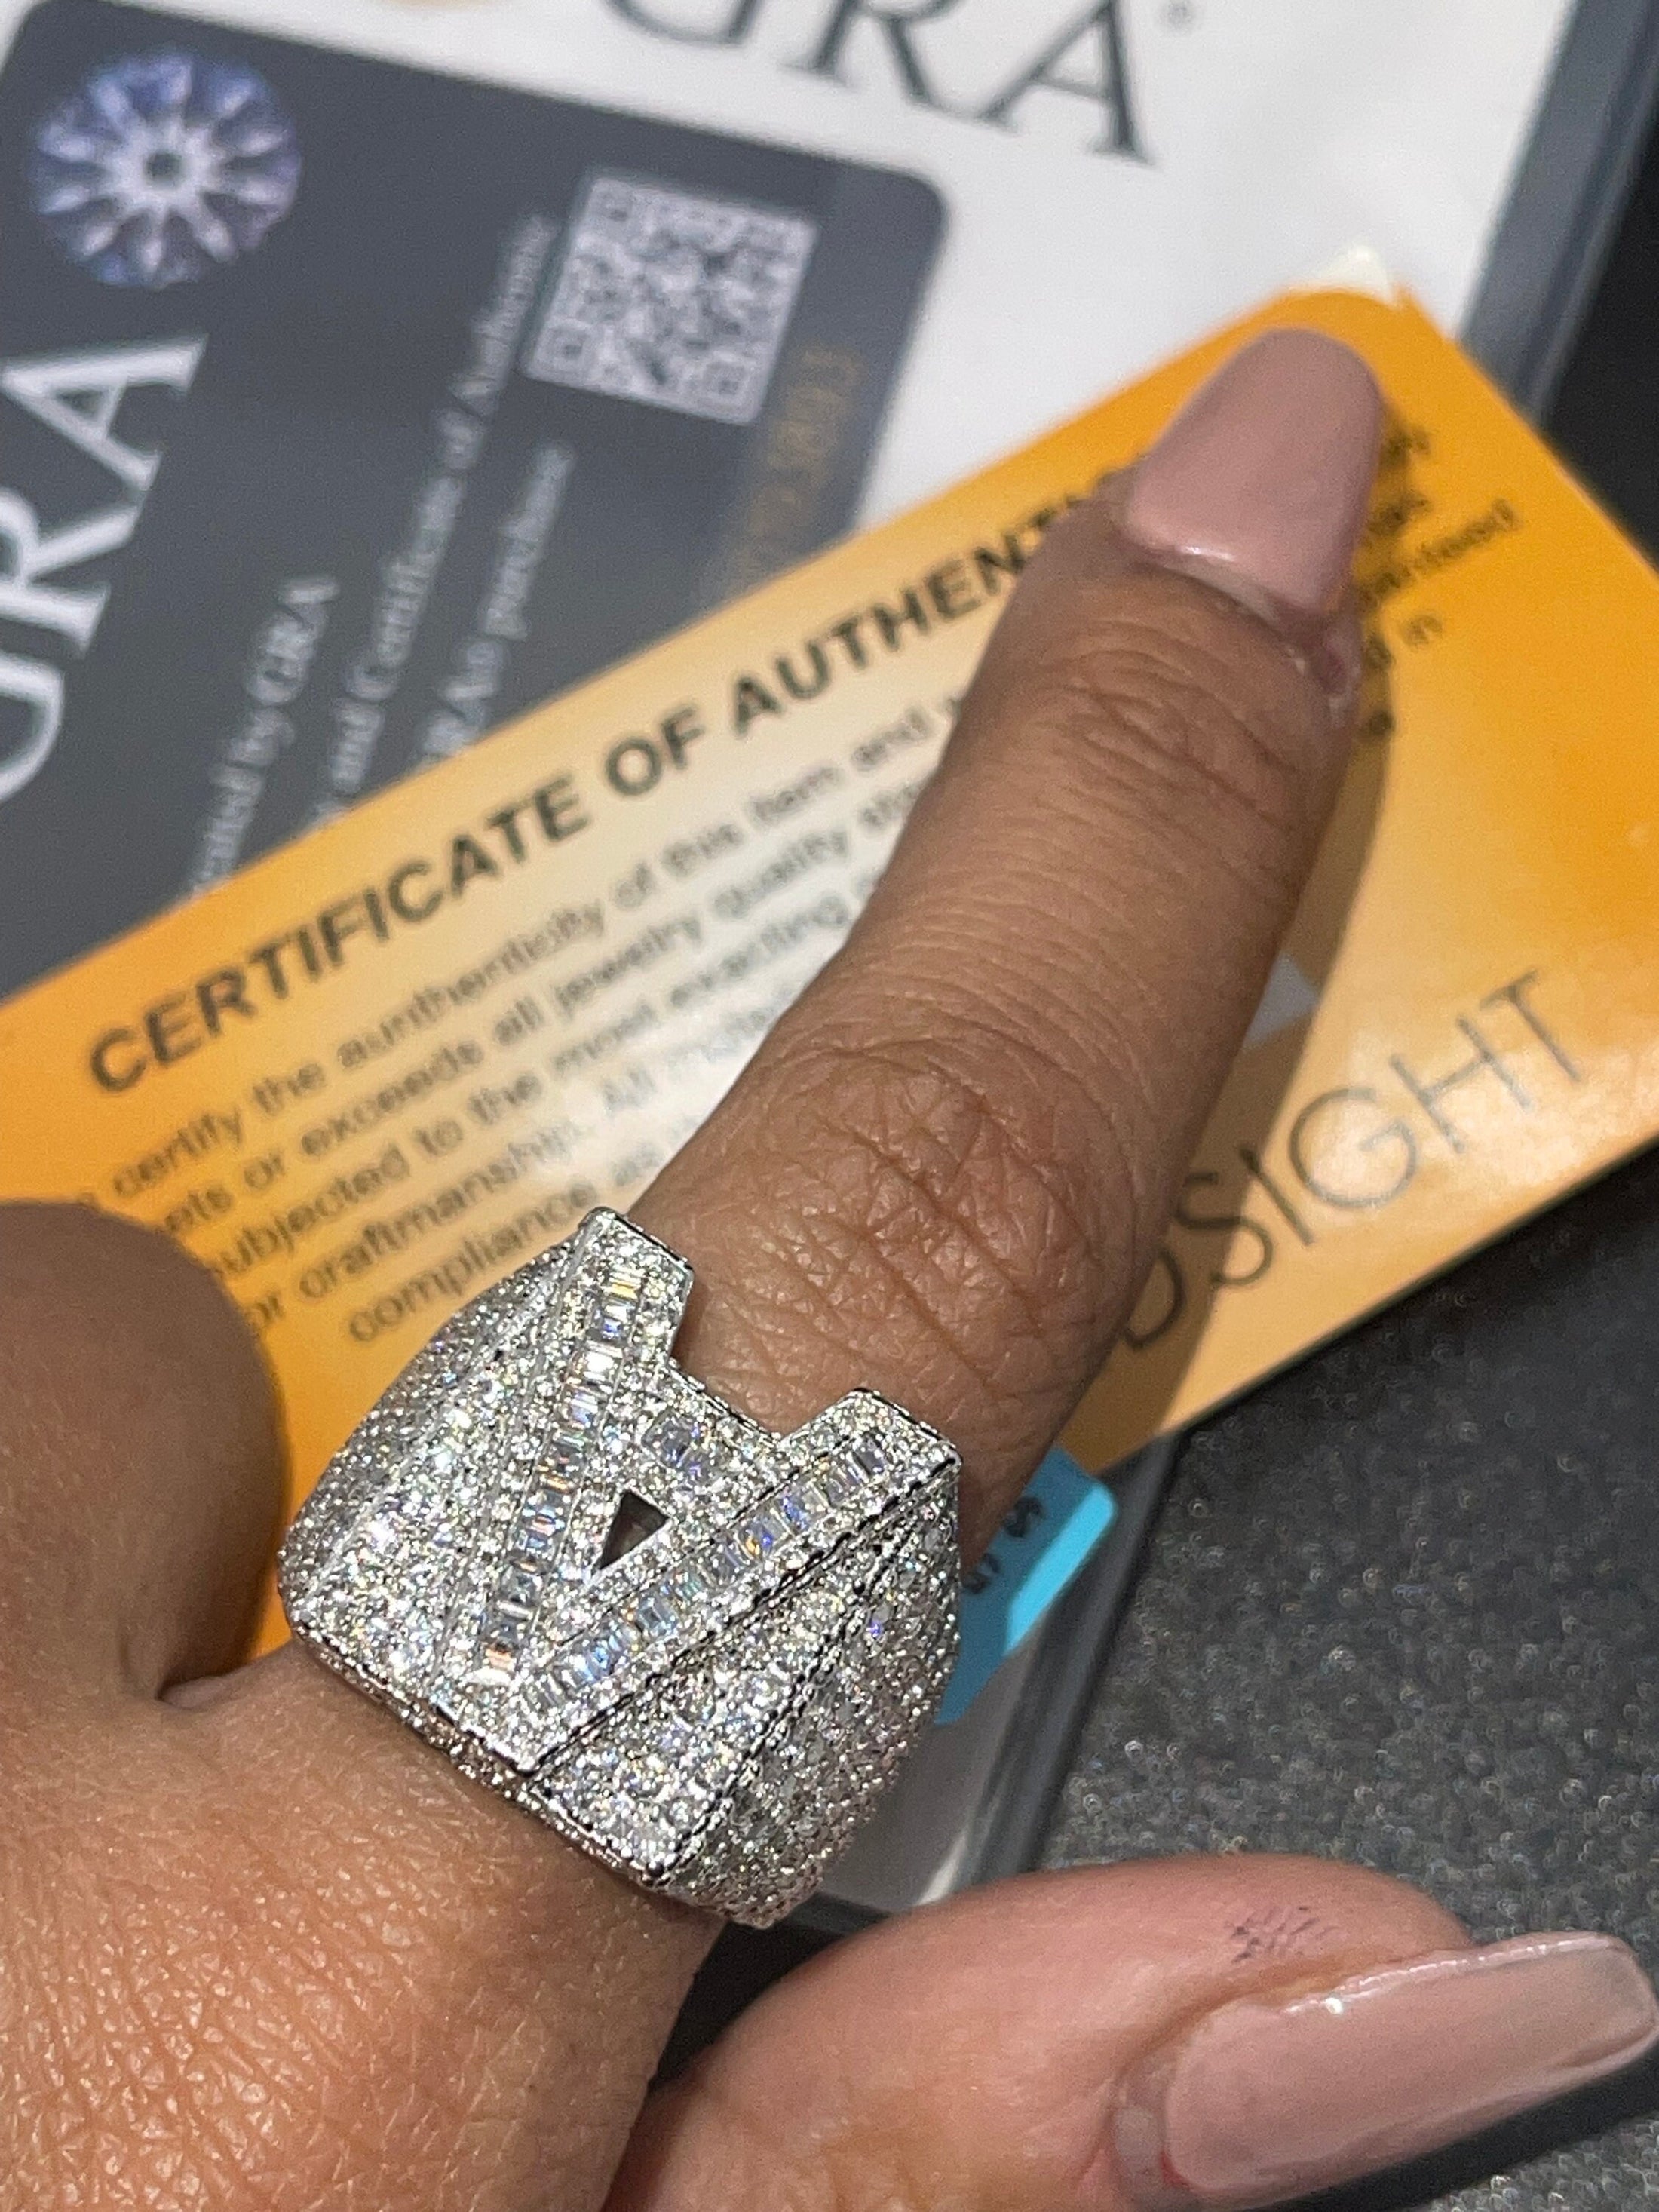 VVS Gra certified Diamond A initial ring, 100% passes diamond testers, 14k White Gold vermeil, HipHop Jewelry, Unique Iced out Moissanite